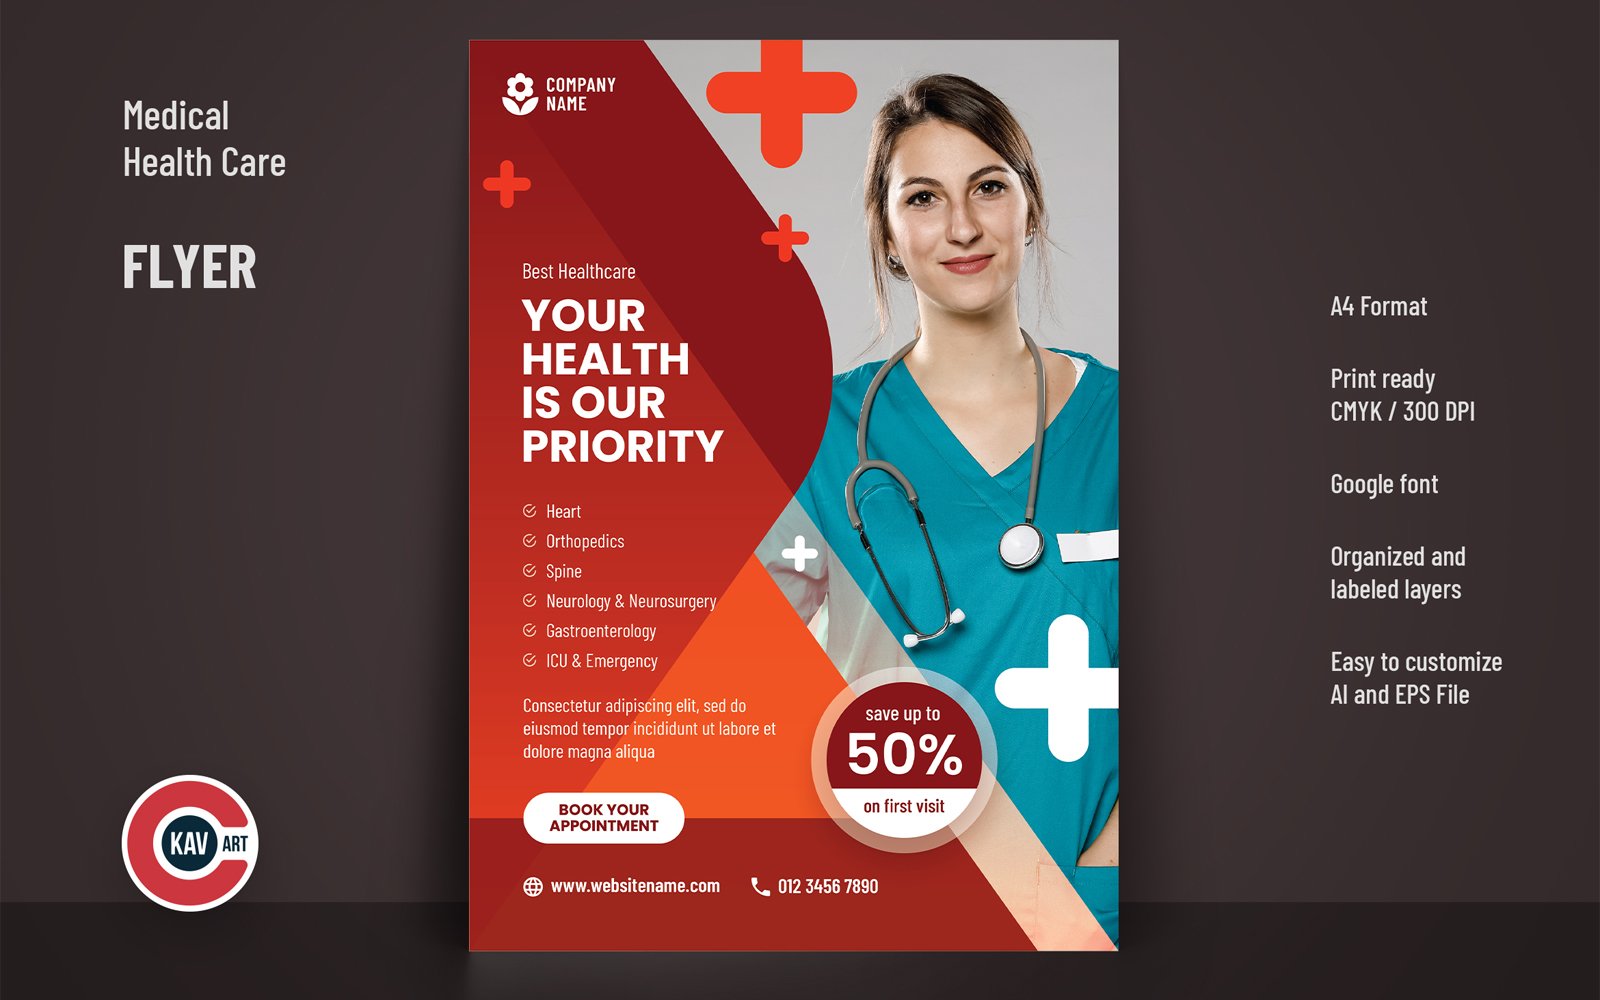 Flyer or Poster Template for Medial Health Care - 00203